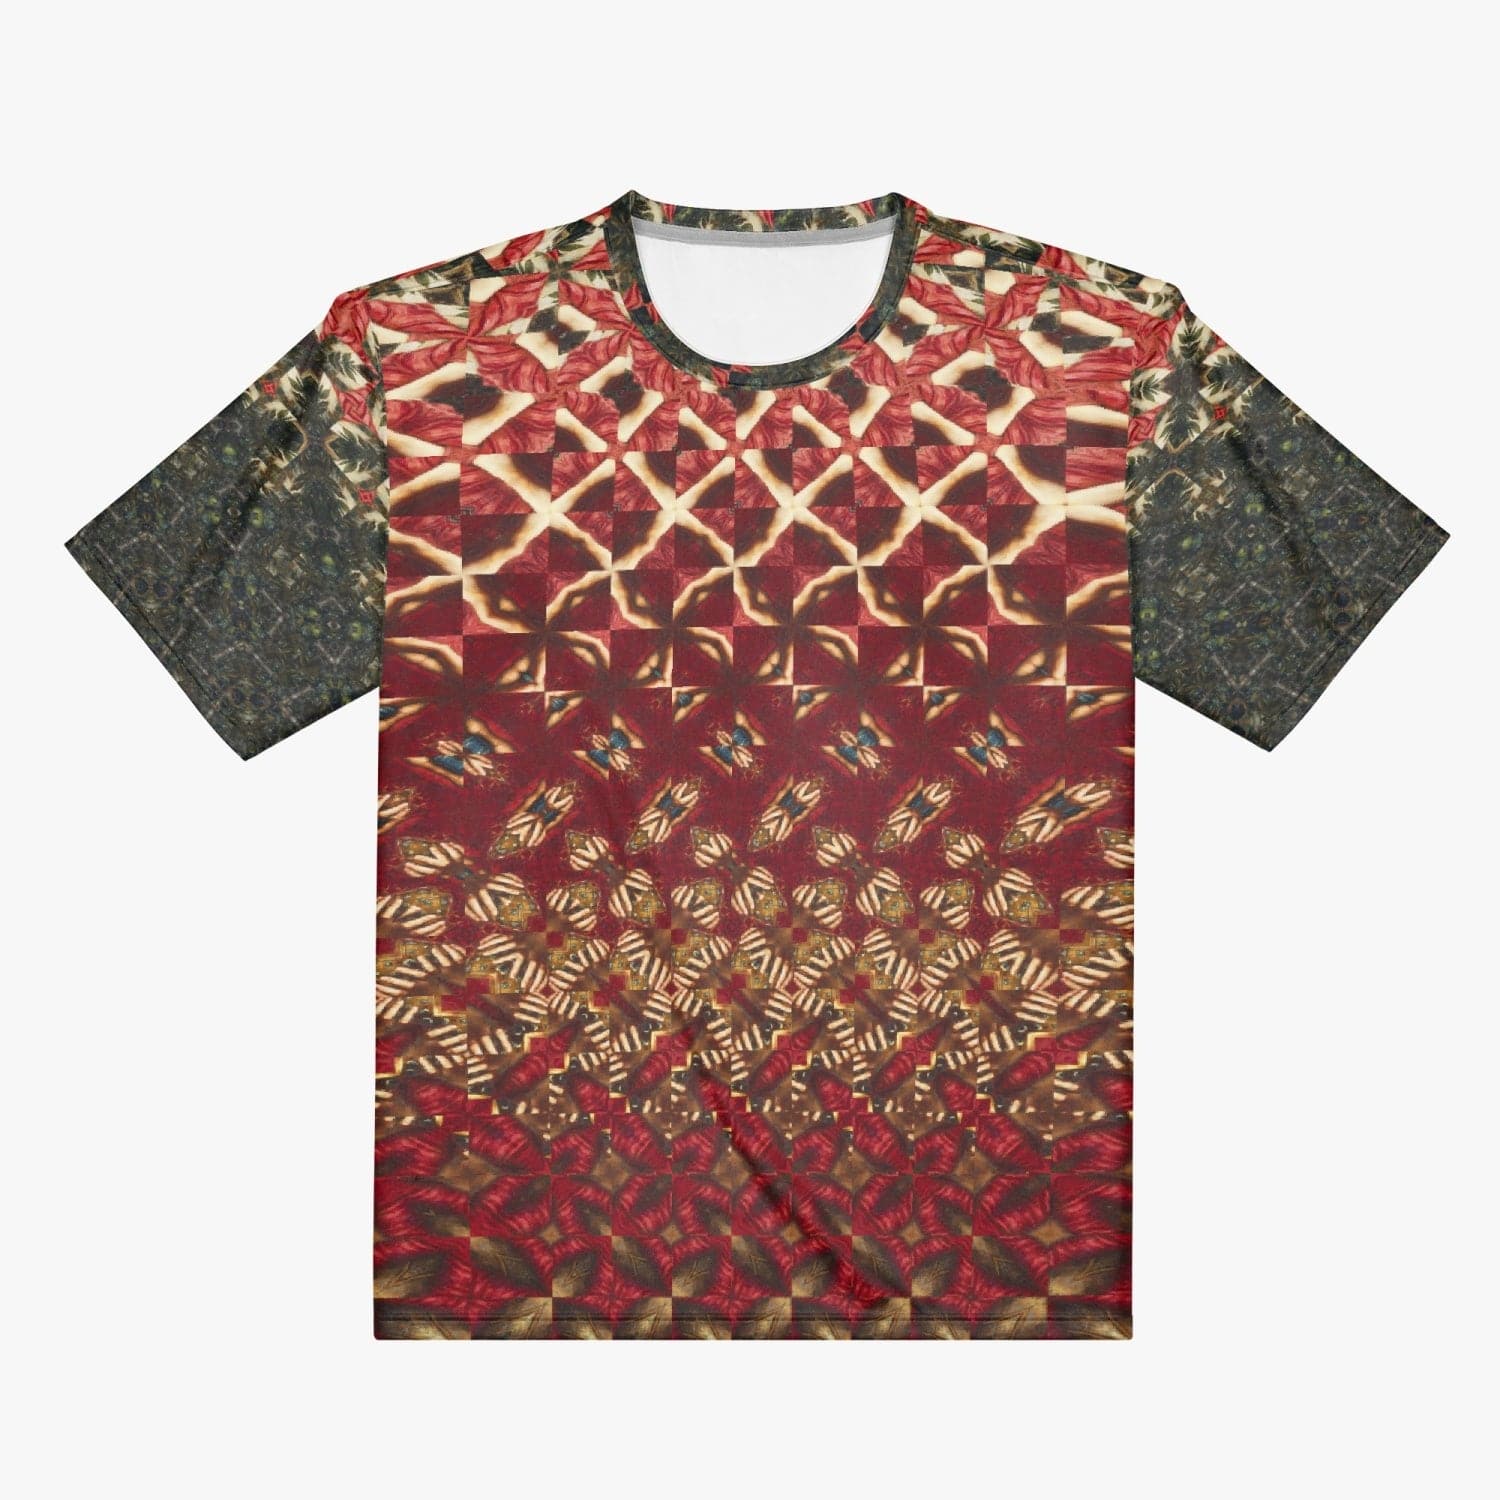 Red with Yellow Patterned. Handmade T-shirt for Men